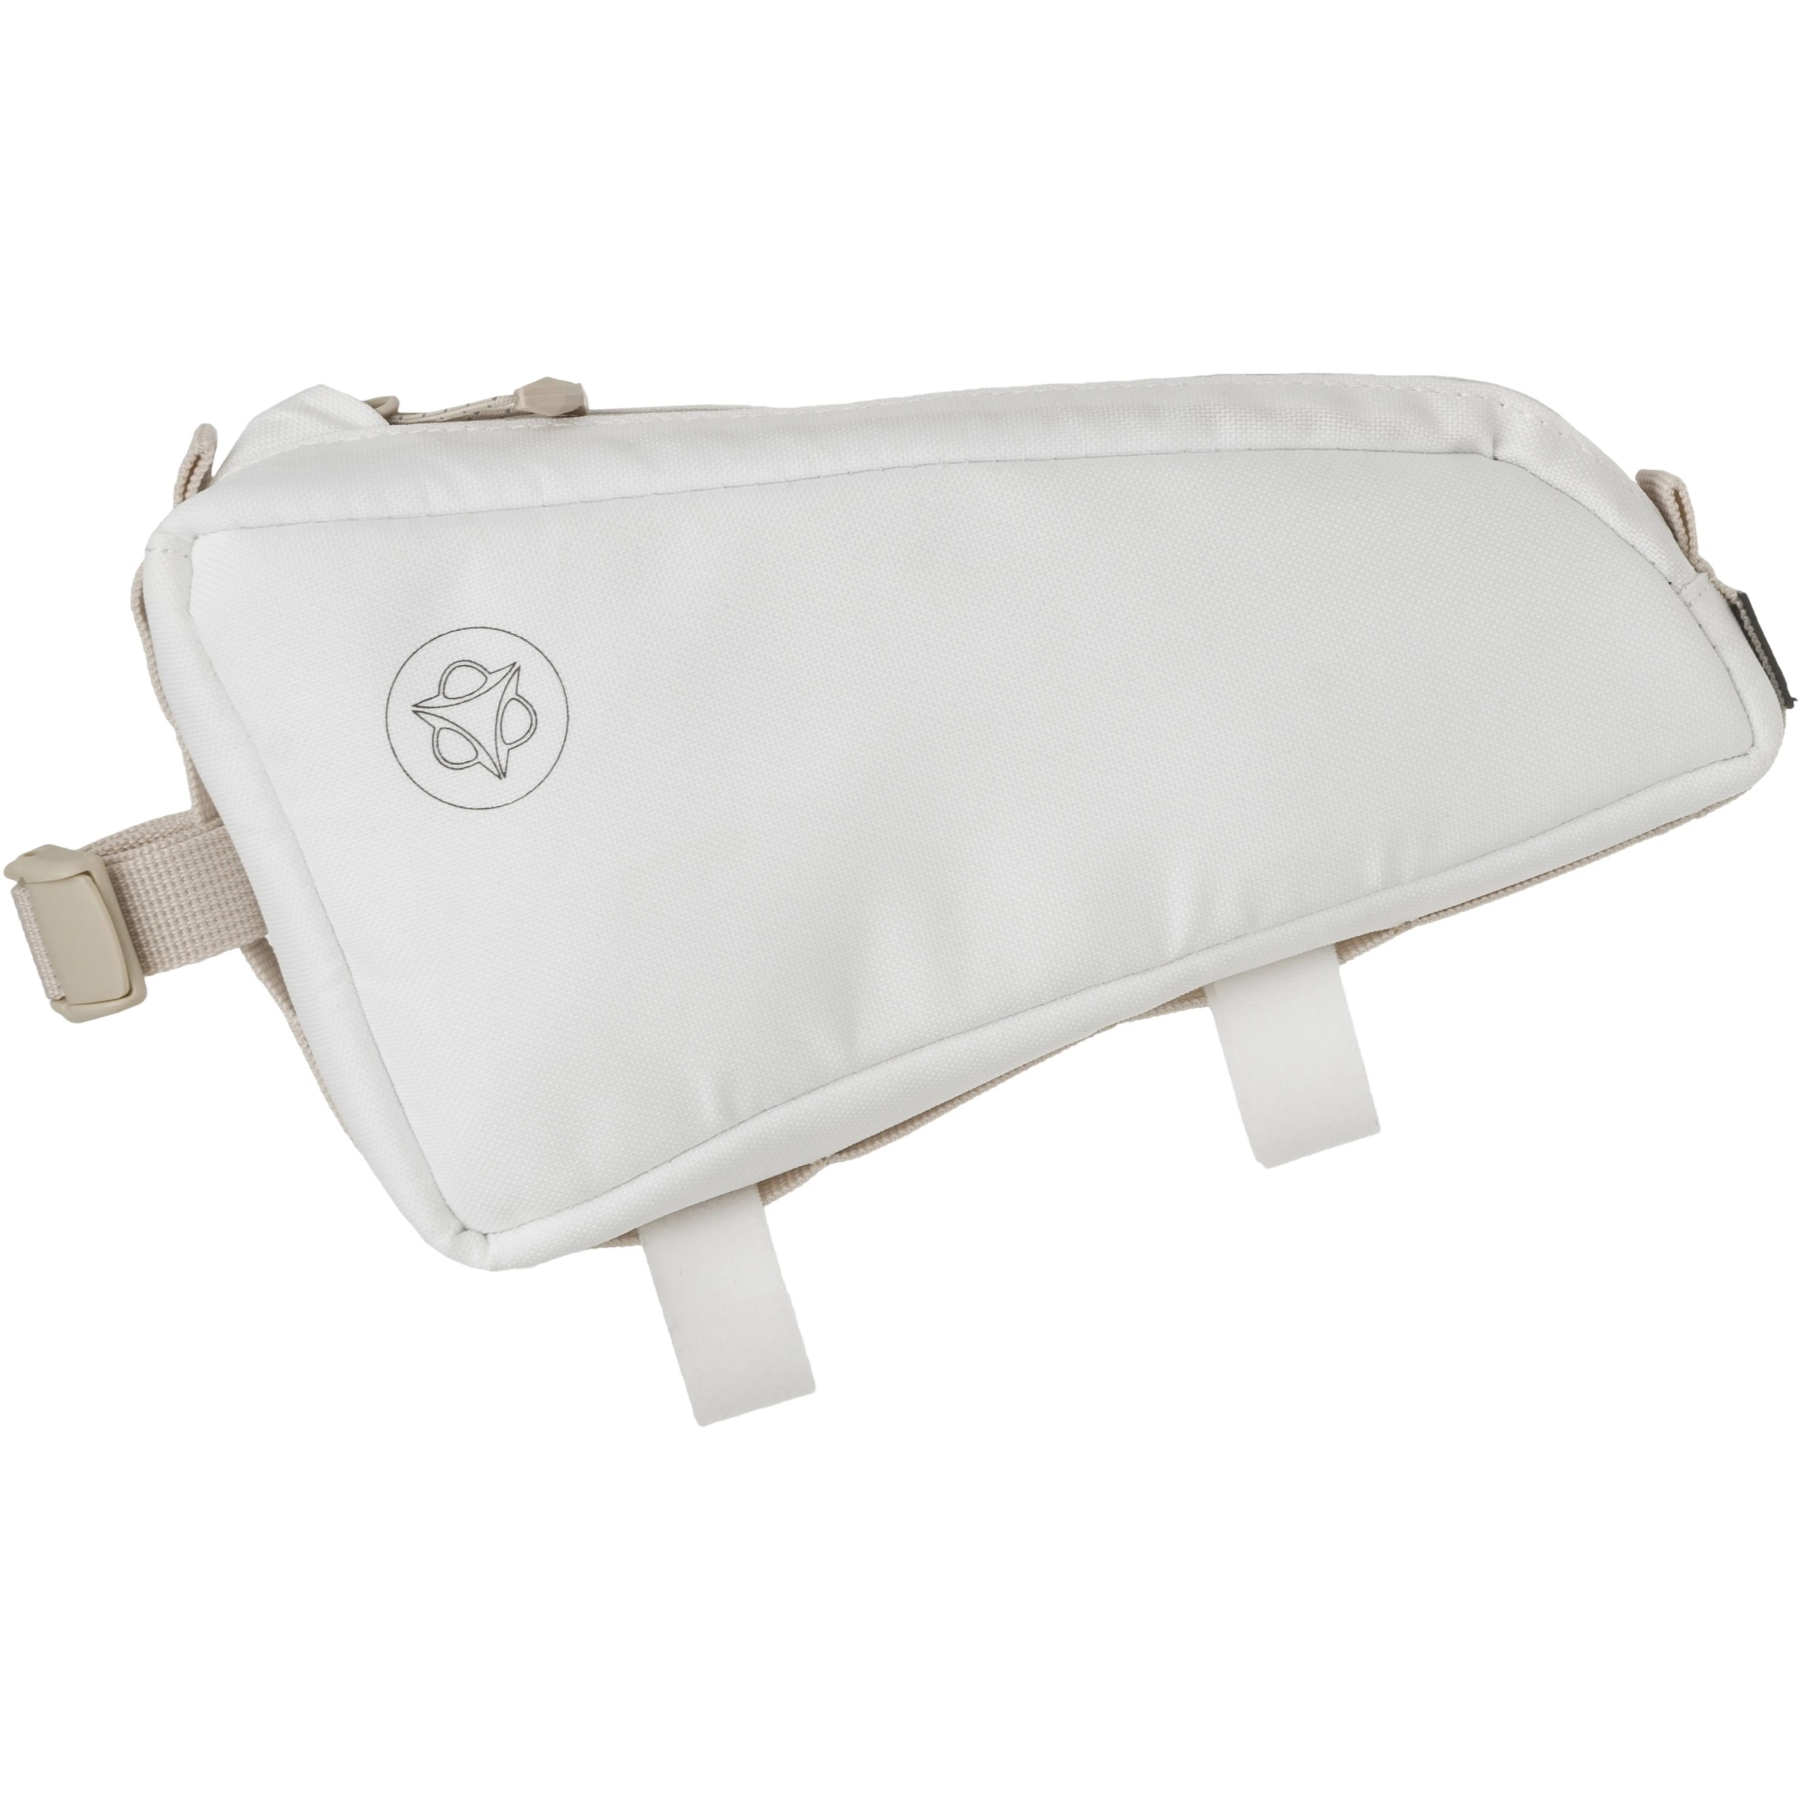 Picture of AGU Venture Top-Tube Frame Bag - 0.7L - undyed